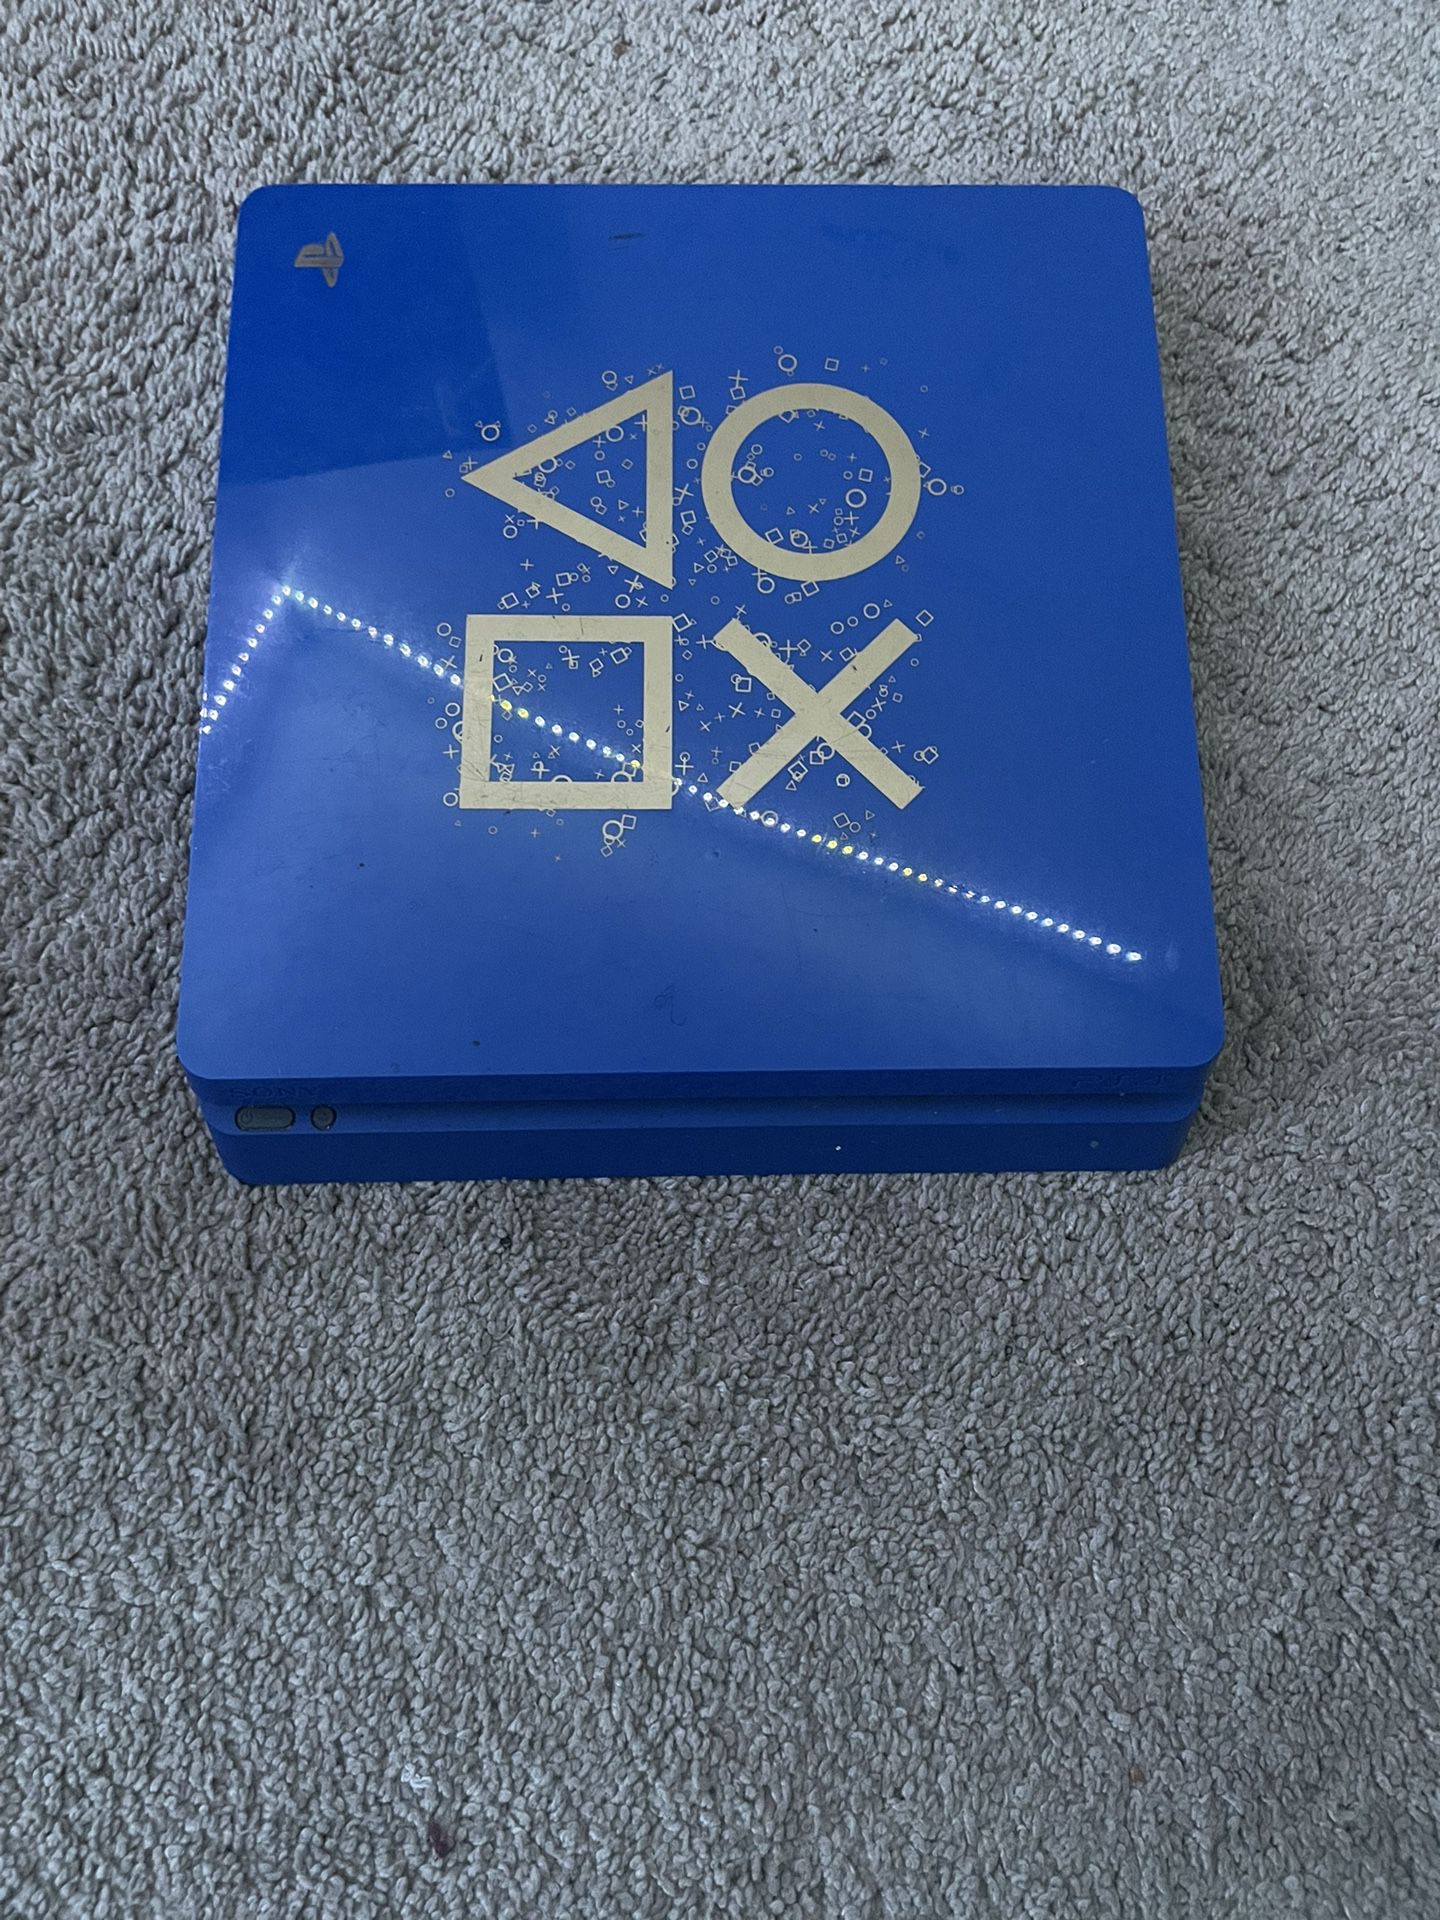 Limited Edition Ps4 